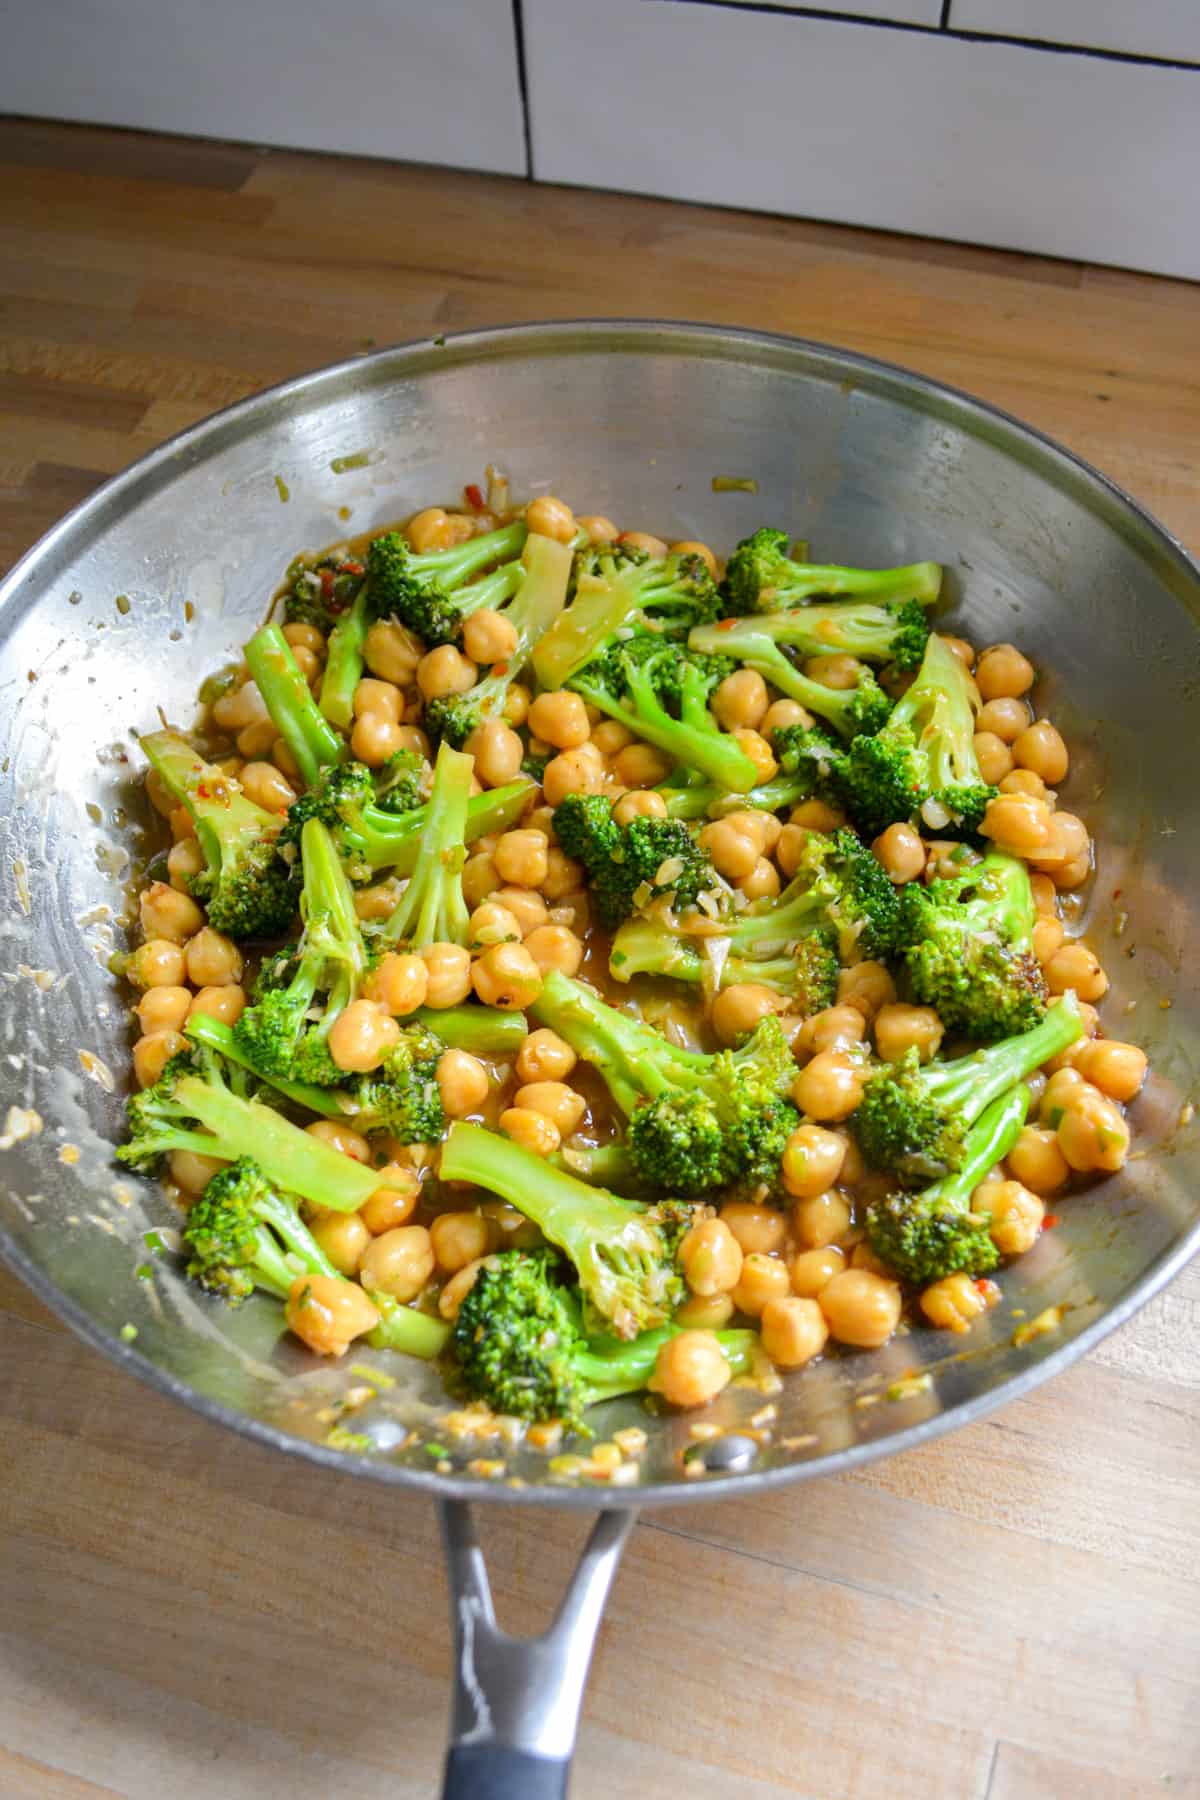 Finished Vegan Chickpea Broccoli Stir Fry in a stainless steel skillet.